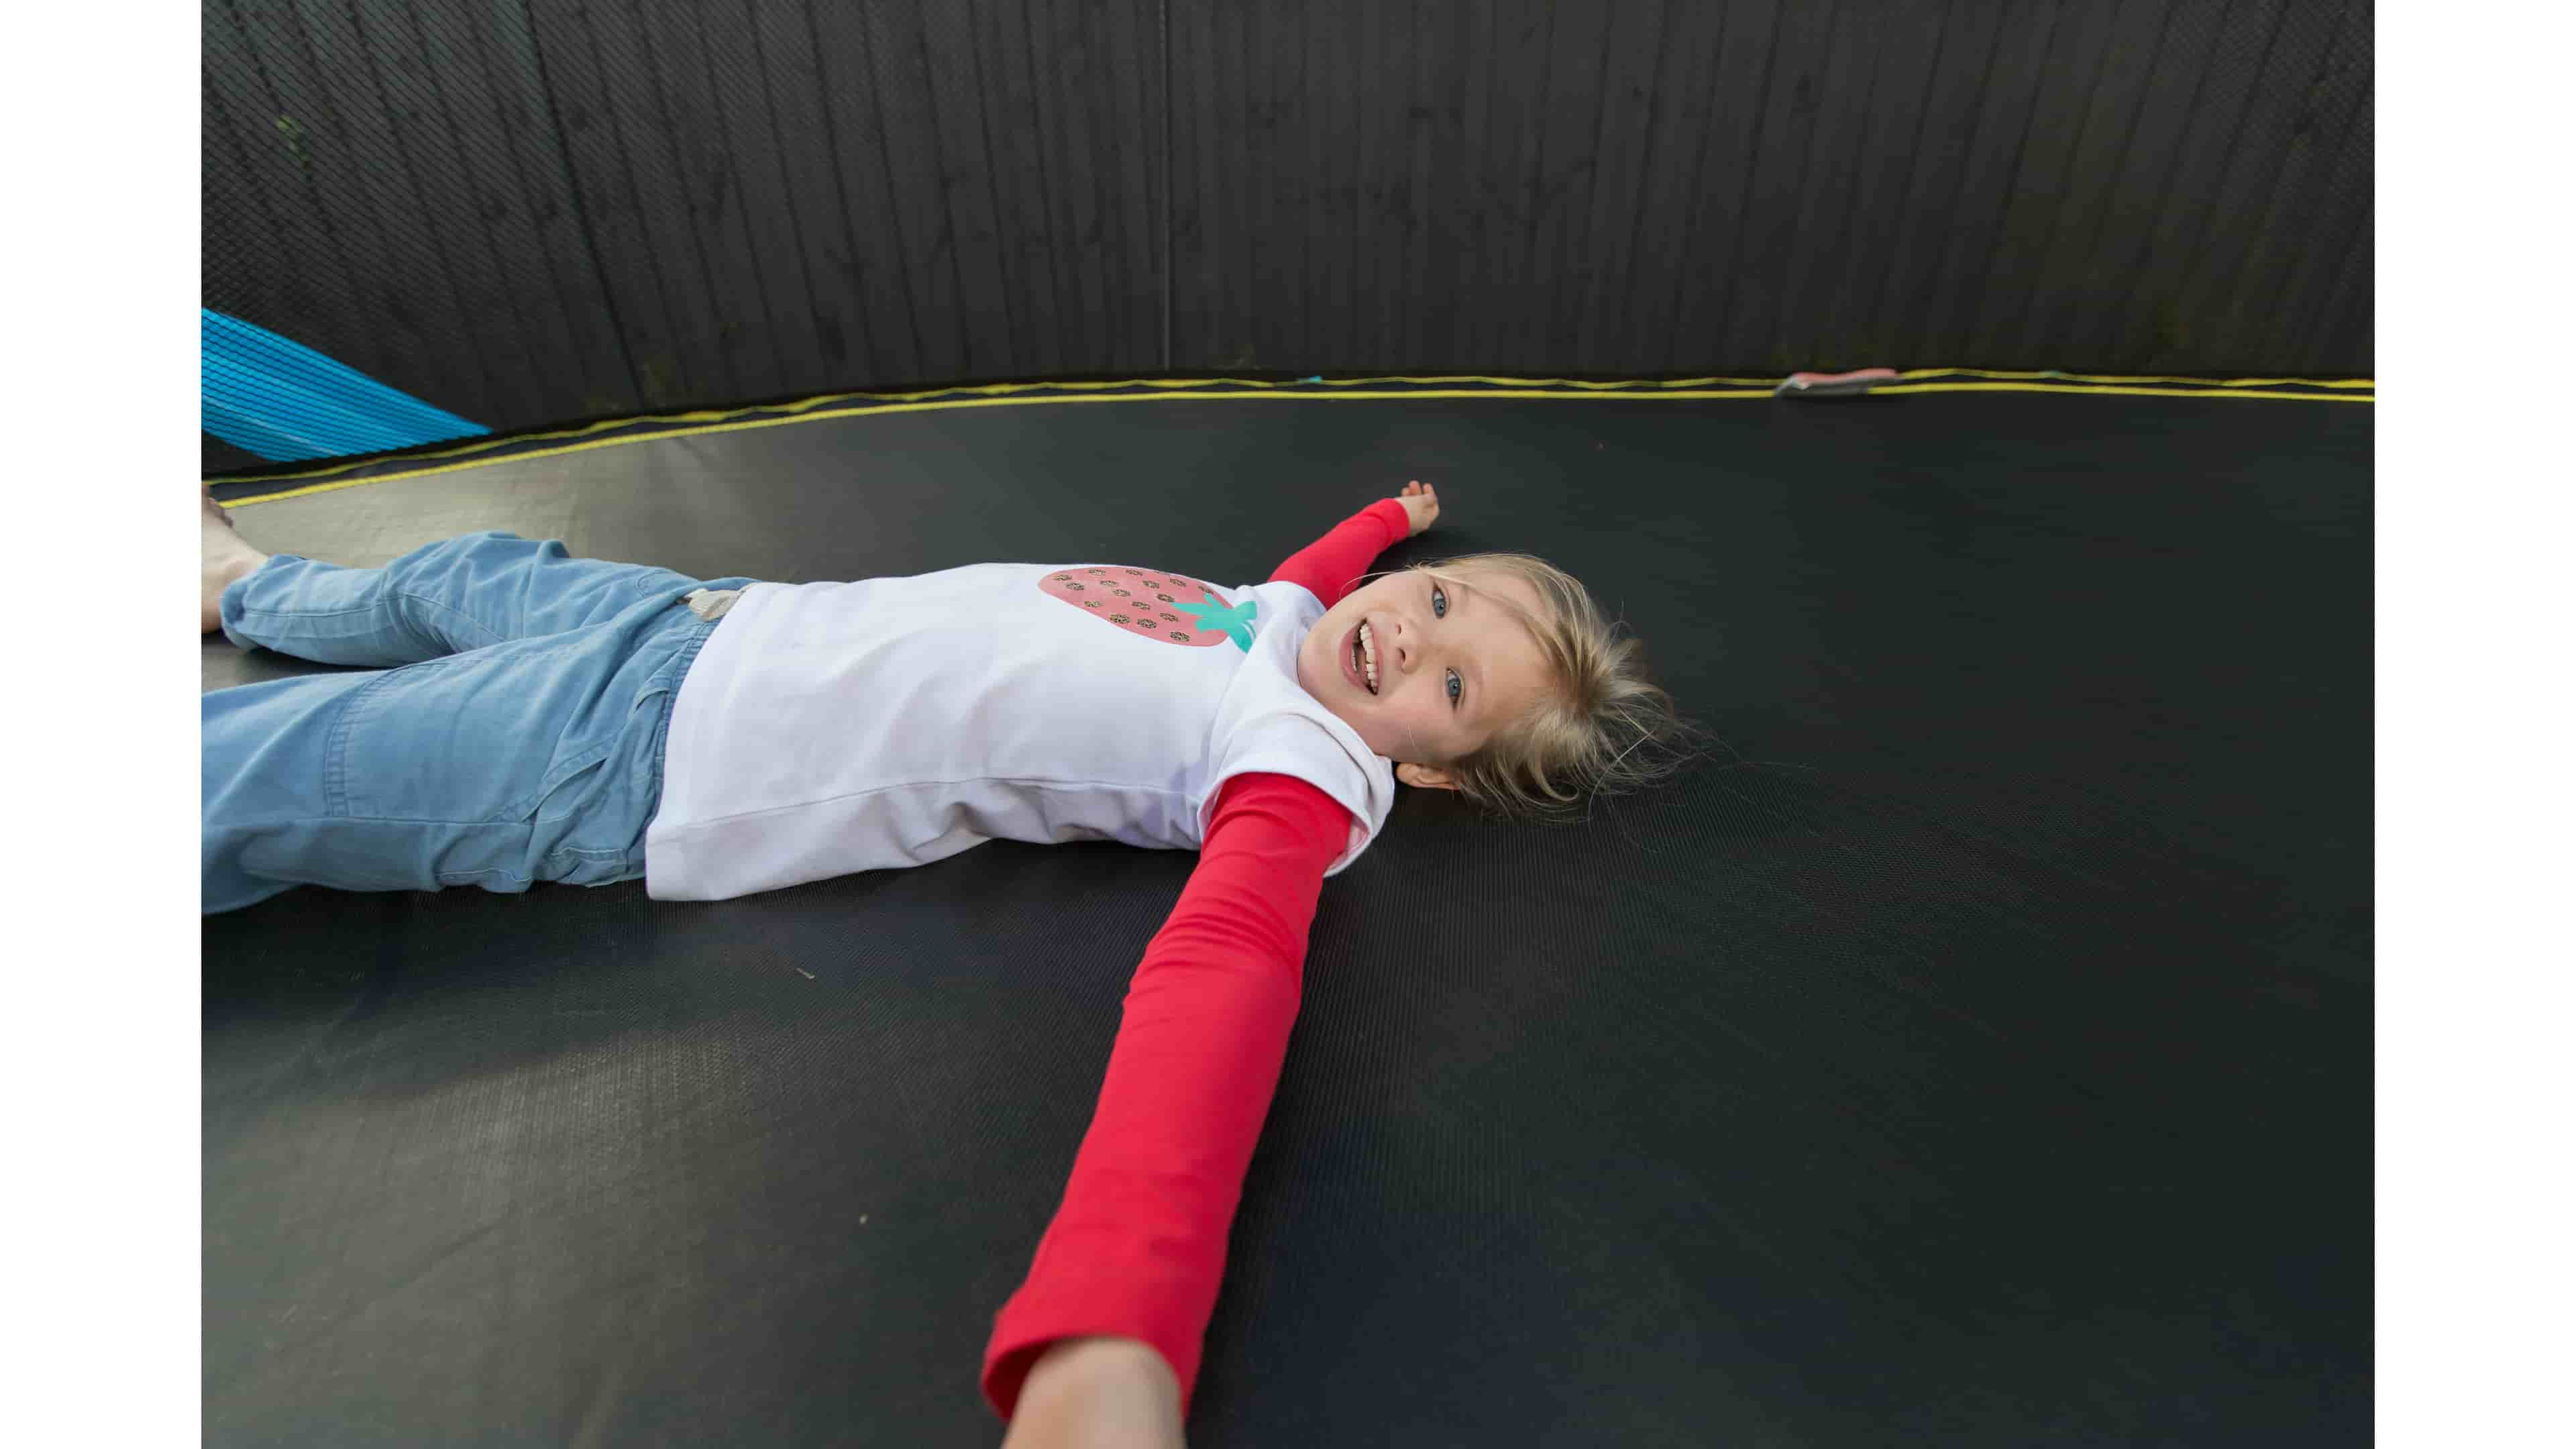 Trampoline Park Injury Statistics: What You Need to Know